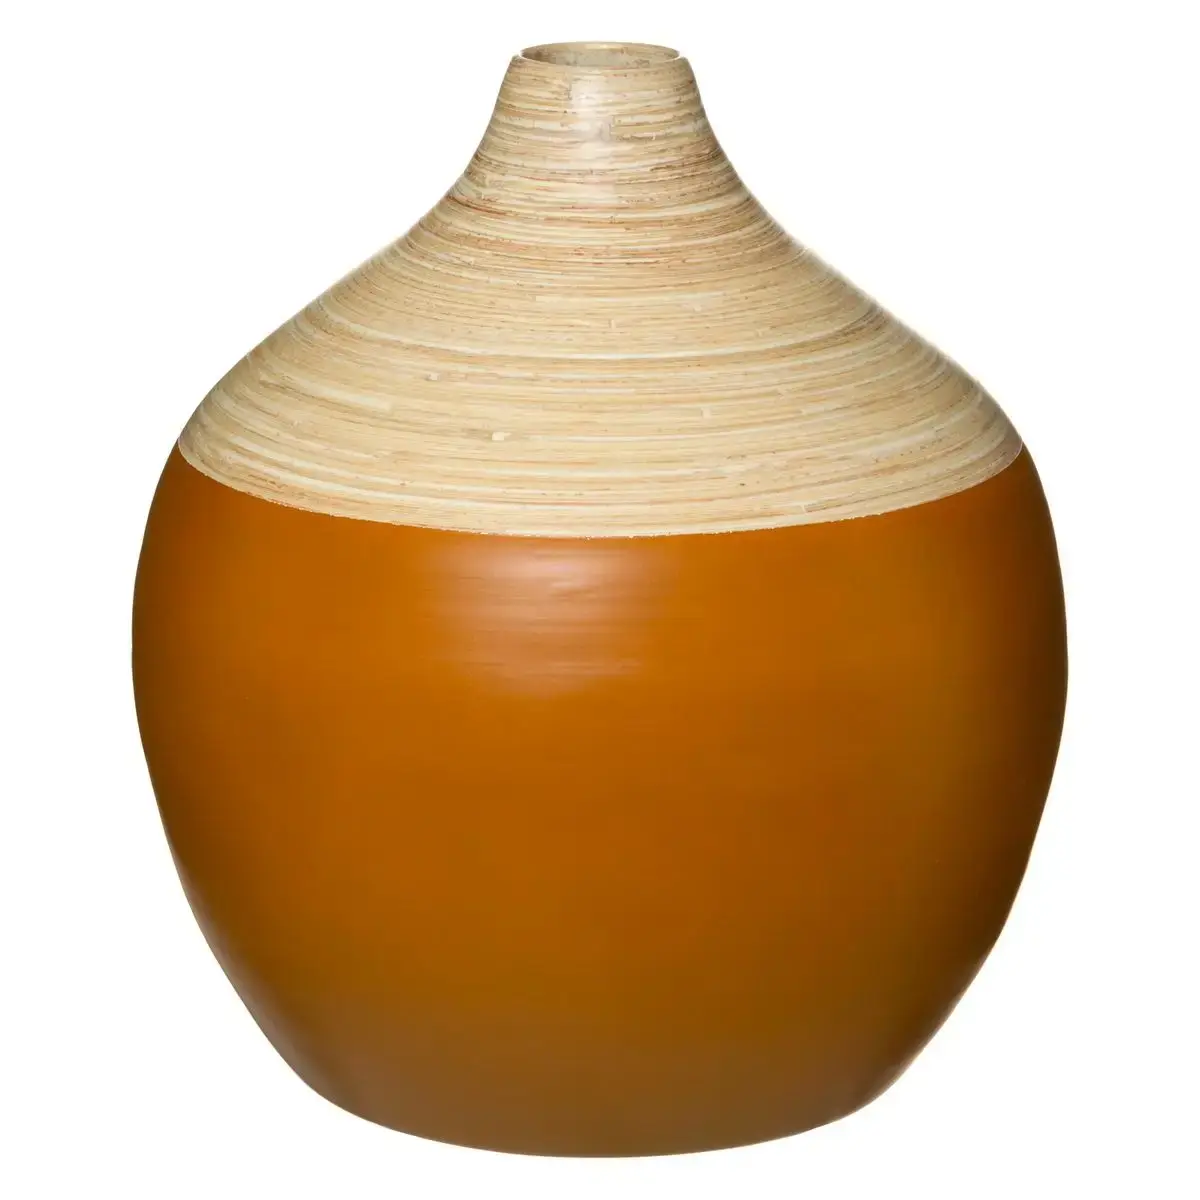 Hot New Design Spun Bamboo Flower Vase For Home Decor Wholesale Good Price Candle Jars Plaques